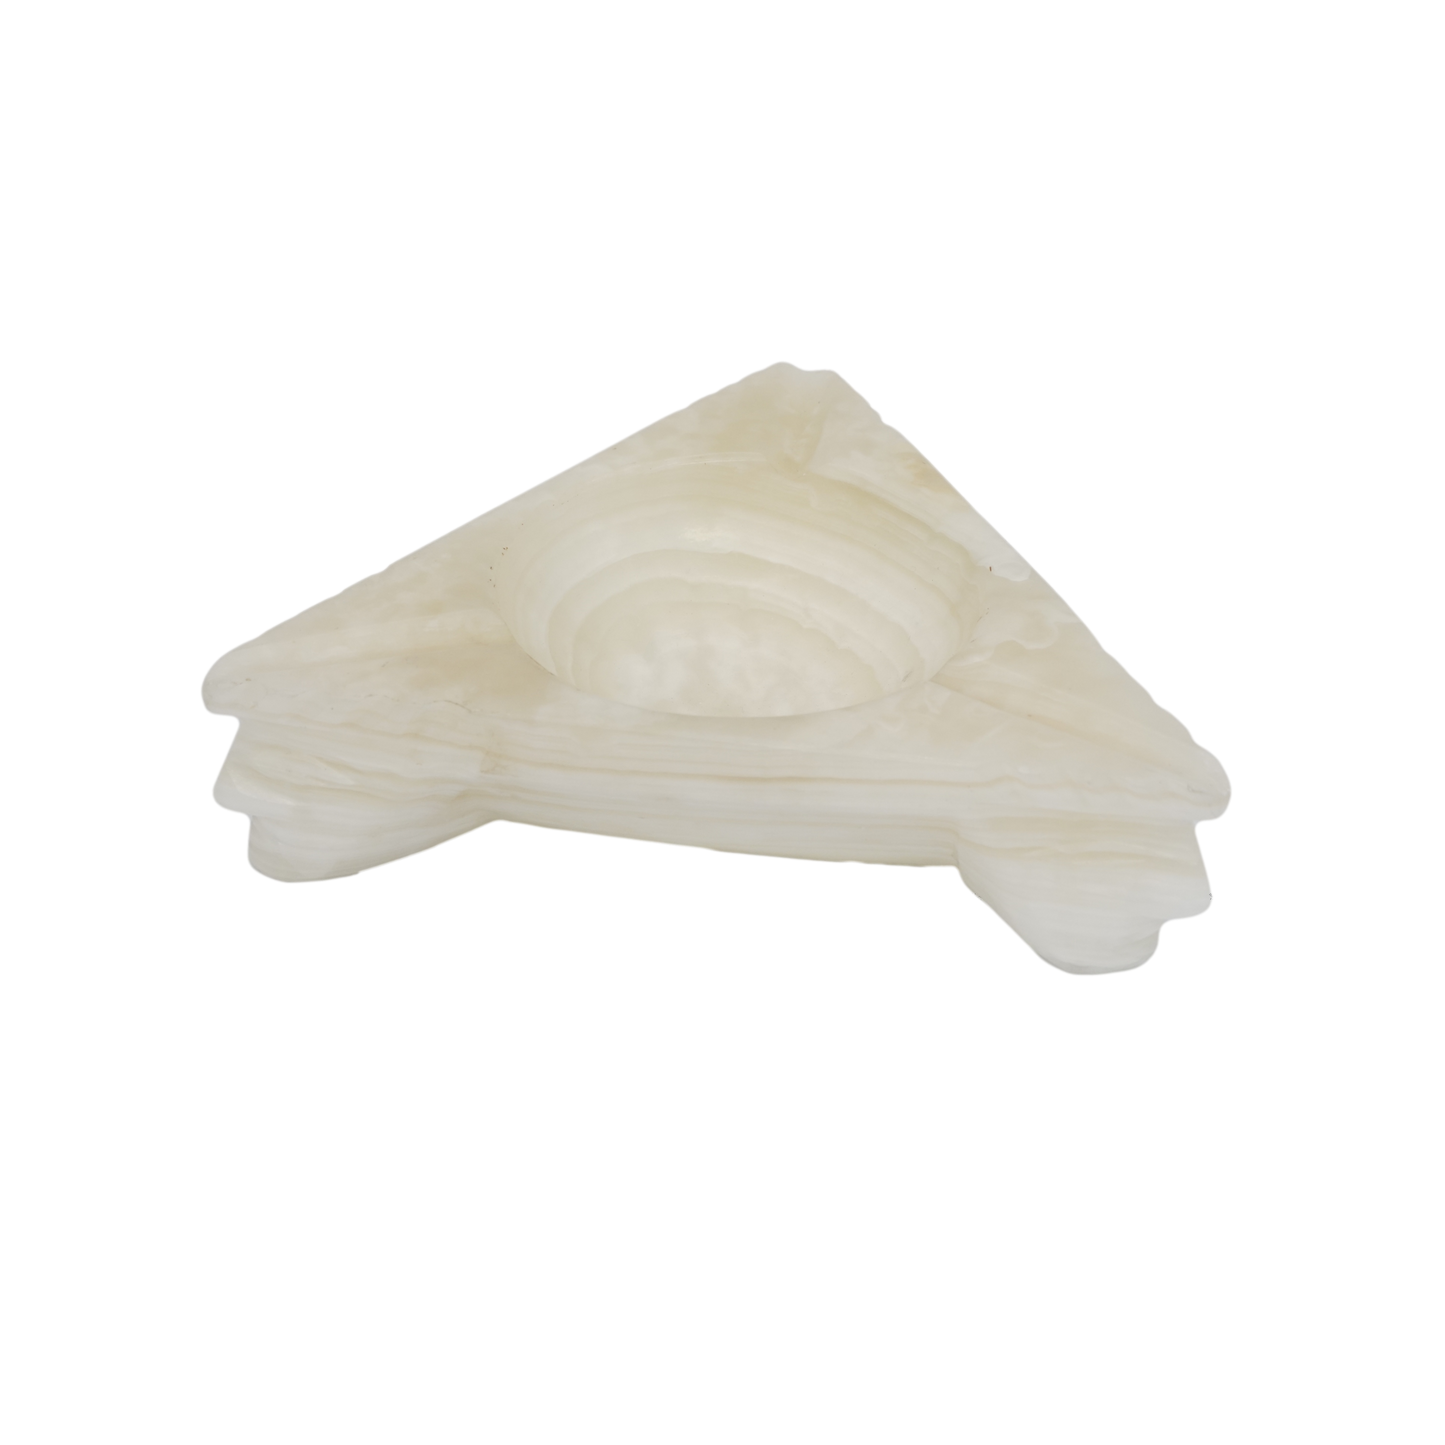 Off-White Marble Hand Carved Ashtray